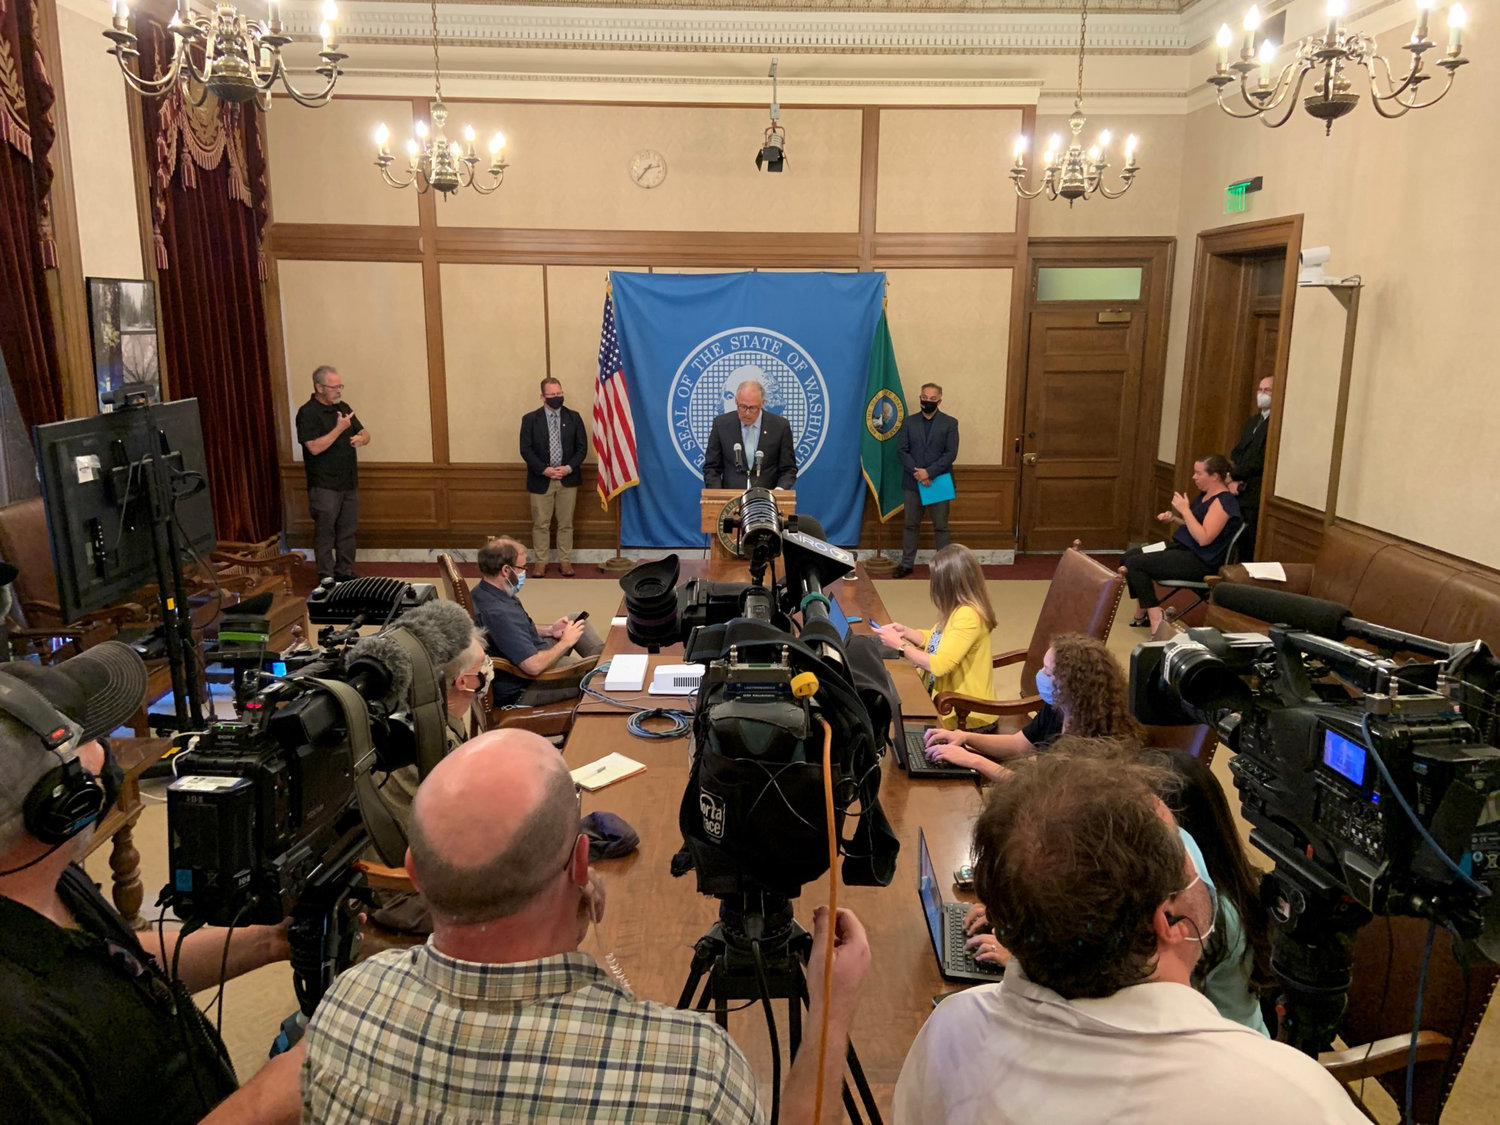 Gov. Jay Inslee announces a statewide requirement for public school employees to get vaccinations against COVID-19 at a press conference Wednesday.